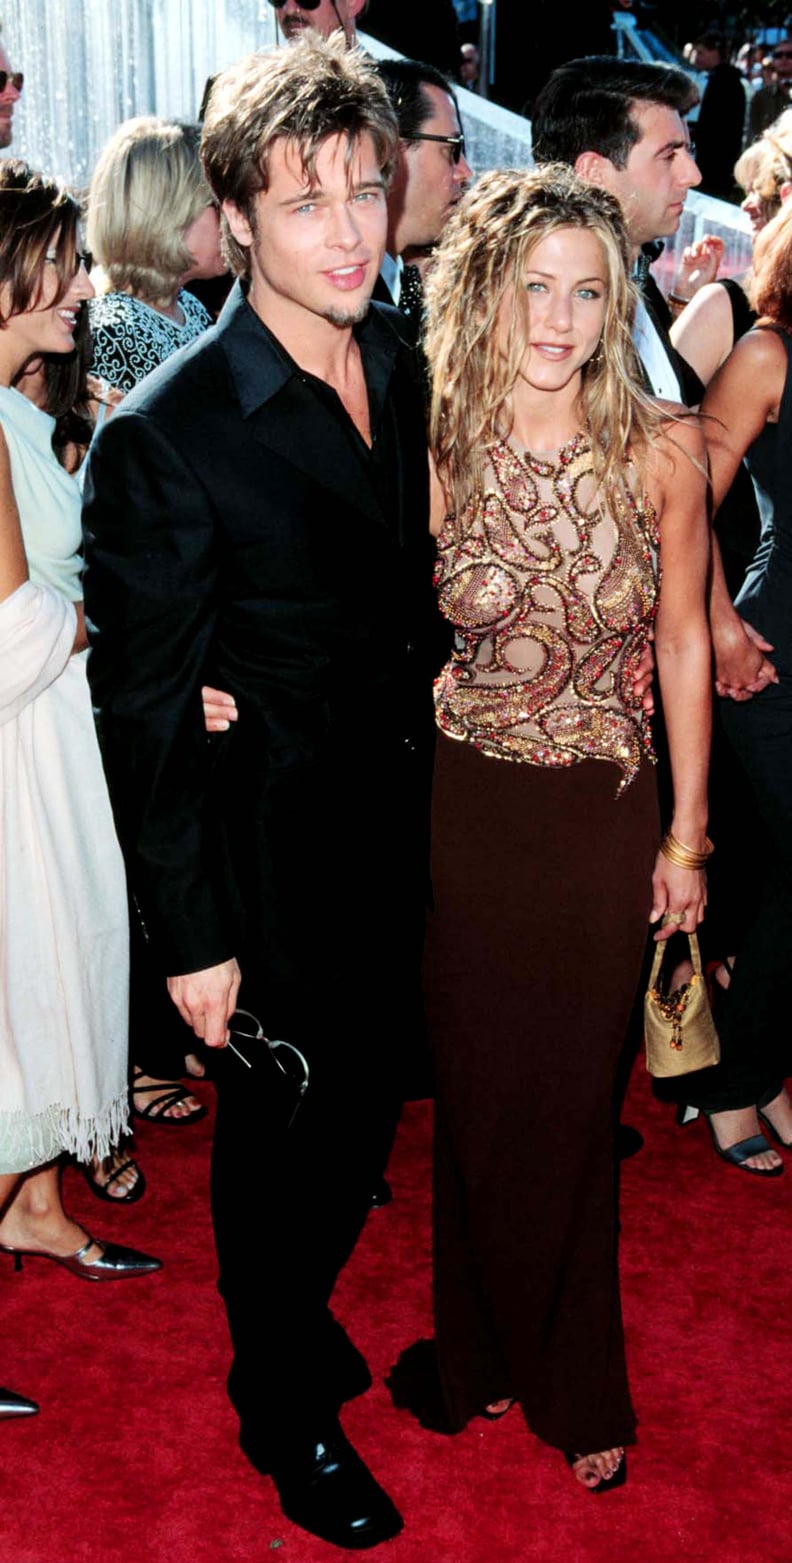 Jen Redefined the Meaning of "Golden" at the 1999 Emmys